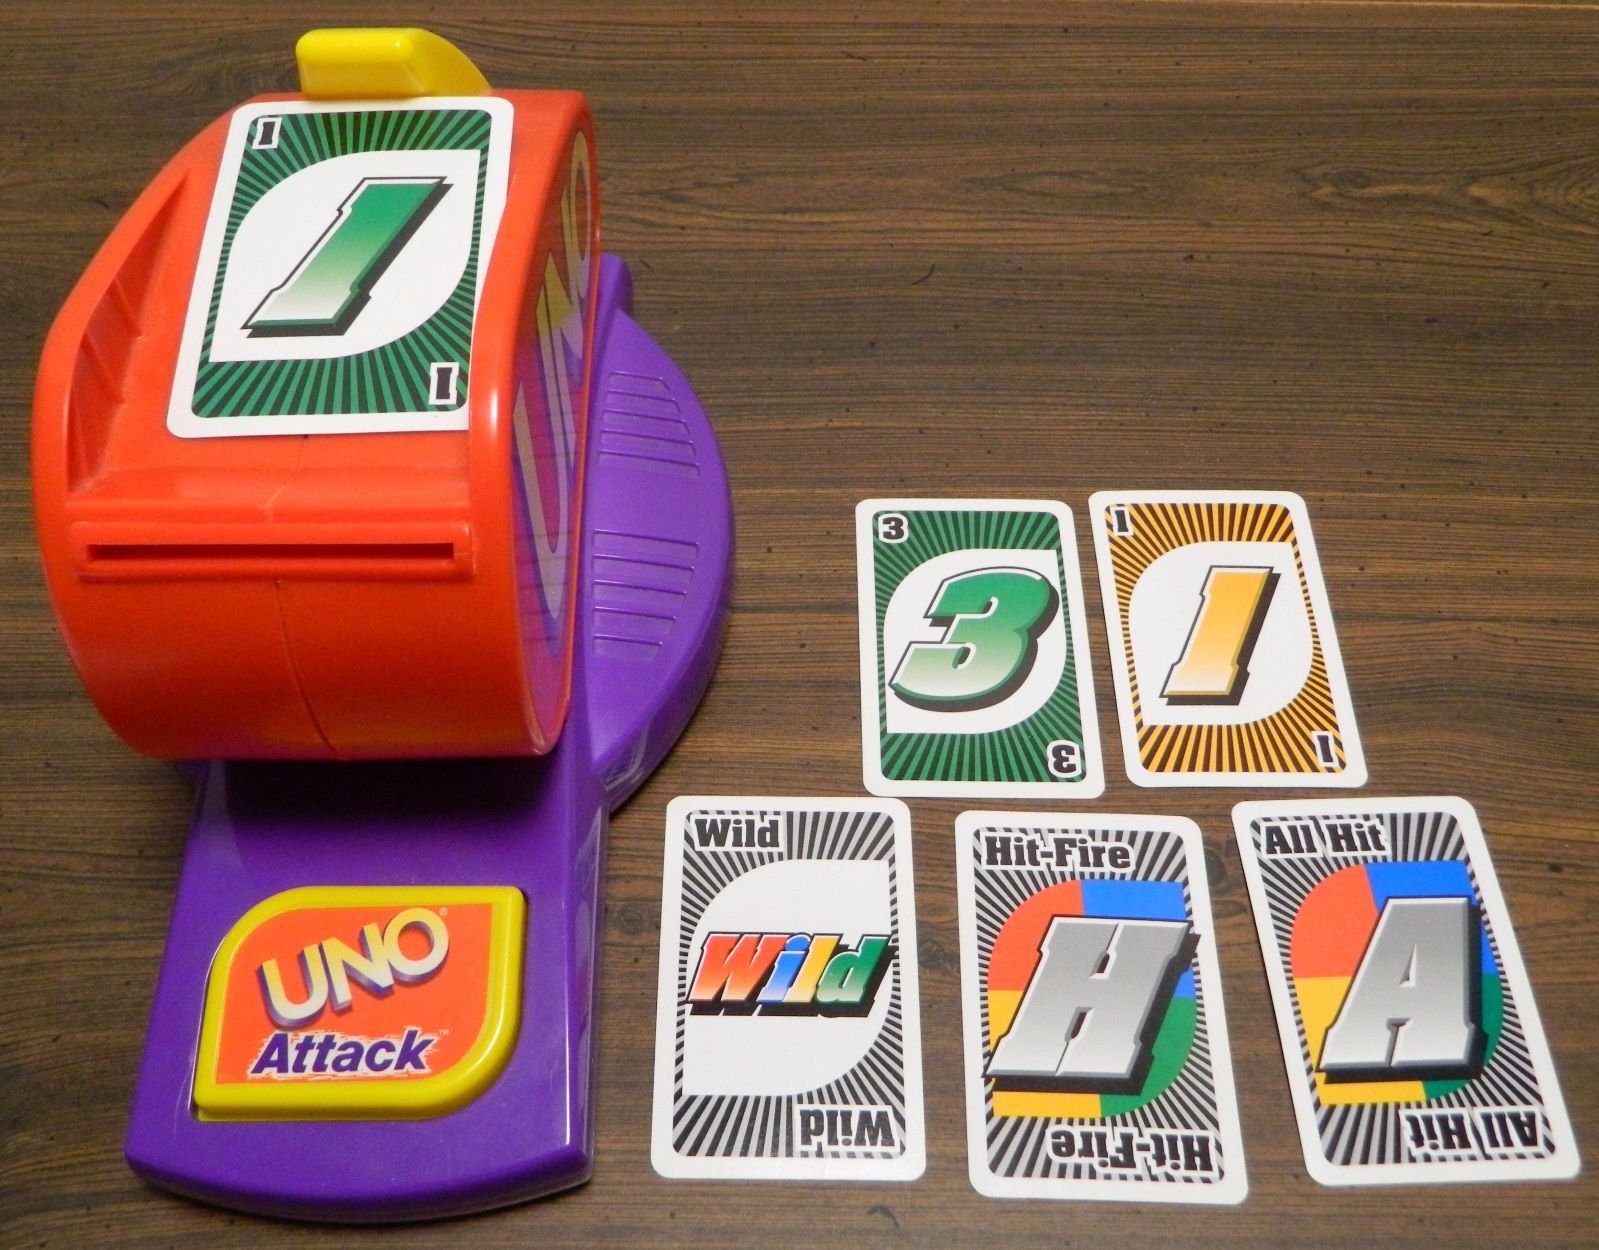 uno-attack-board-game-review-and-rules-geeky-hobbies